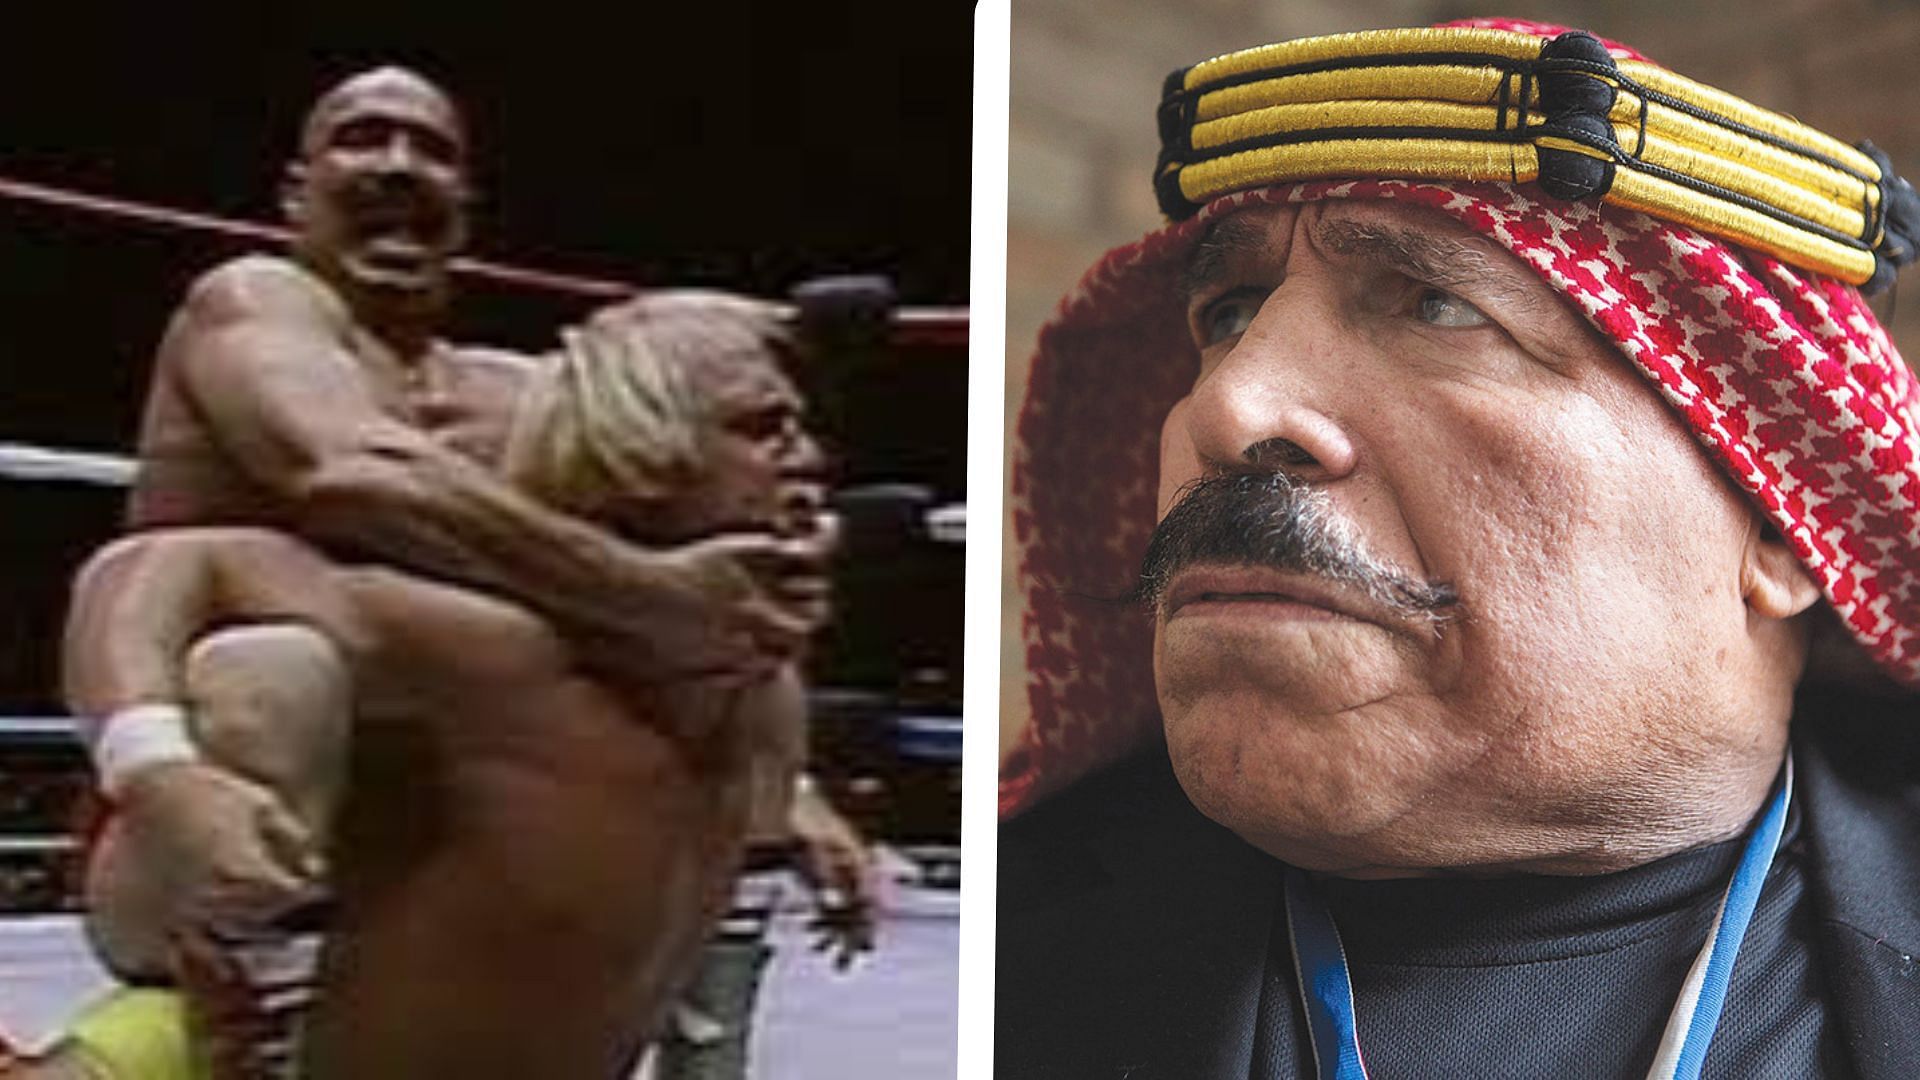 The Iron Sheik has left a major wrestling legacy